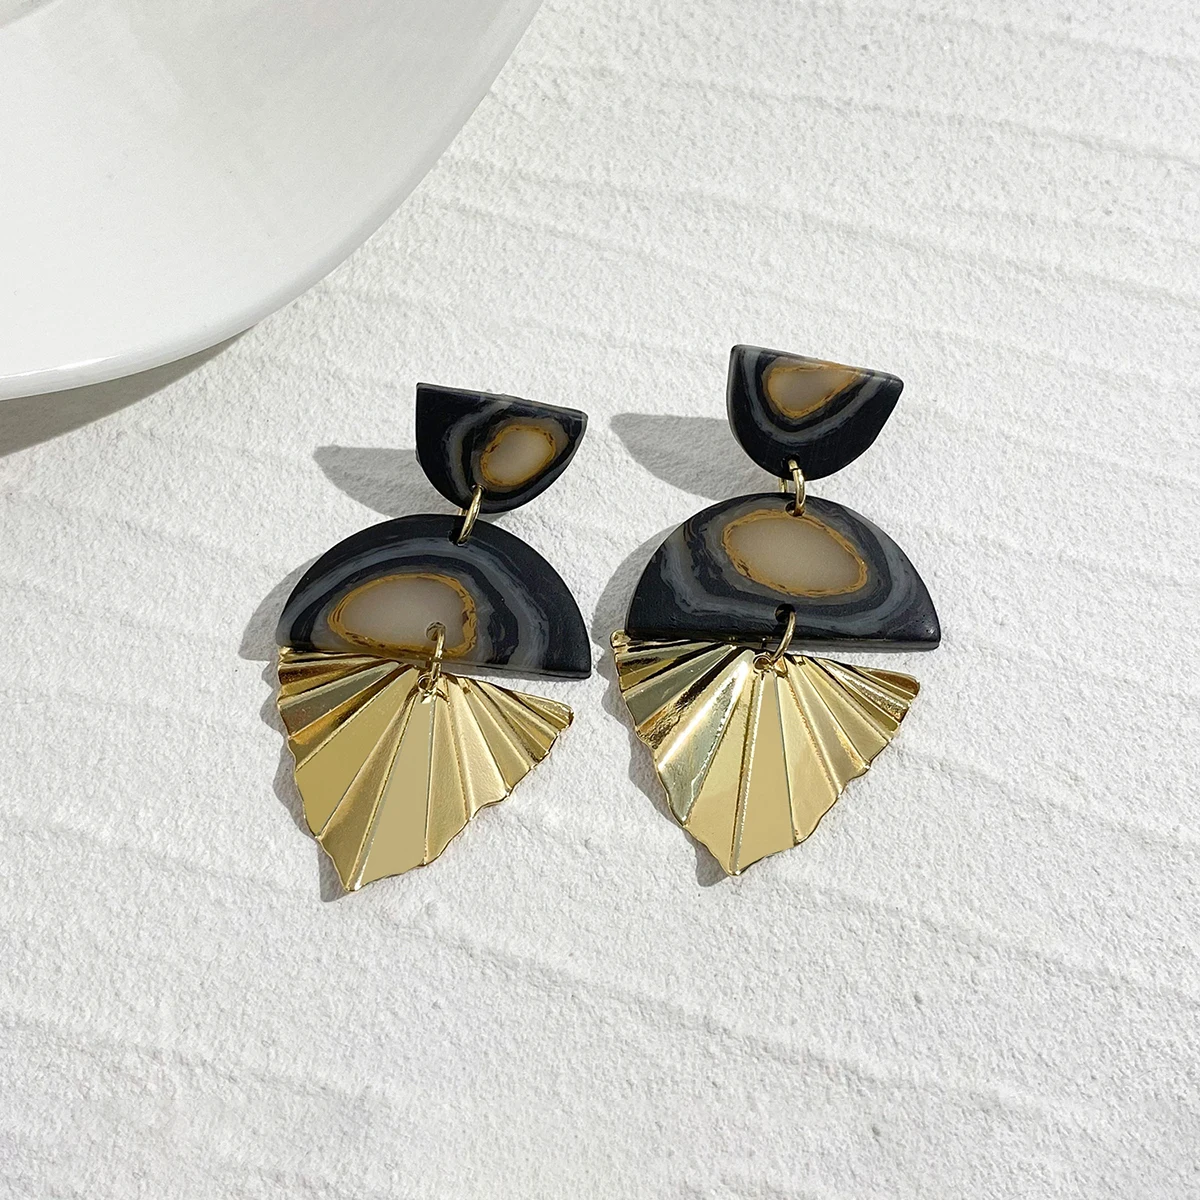 AENSOA Classic Black White Polymer Clay Drop Earrings for Women Handmade  Abstract Pattern Geometric Hanging Earrings Jewelry